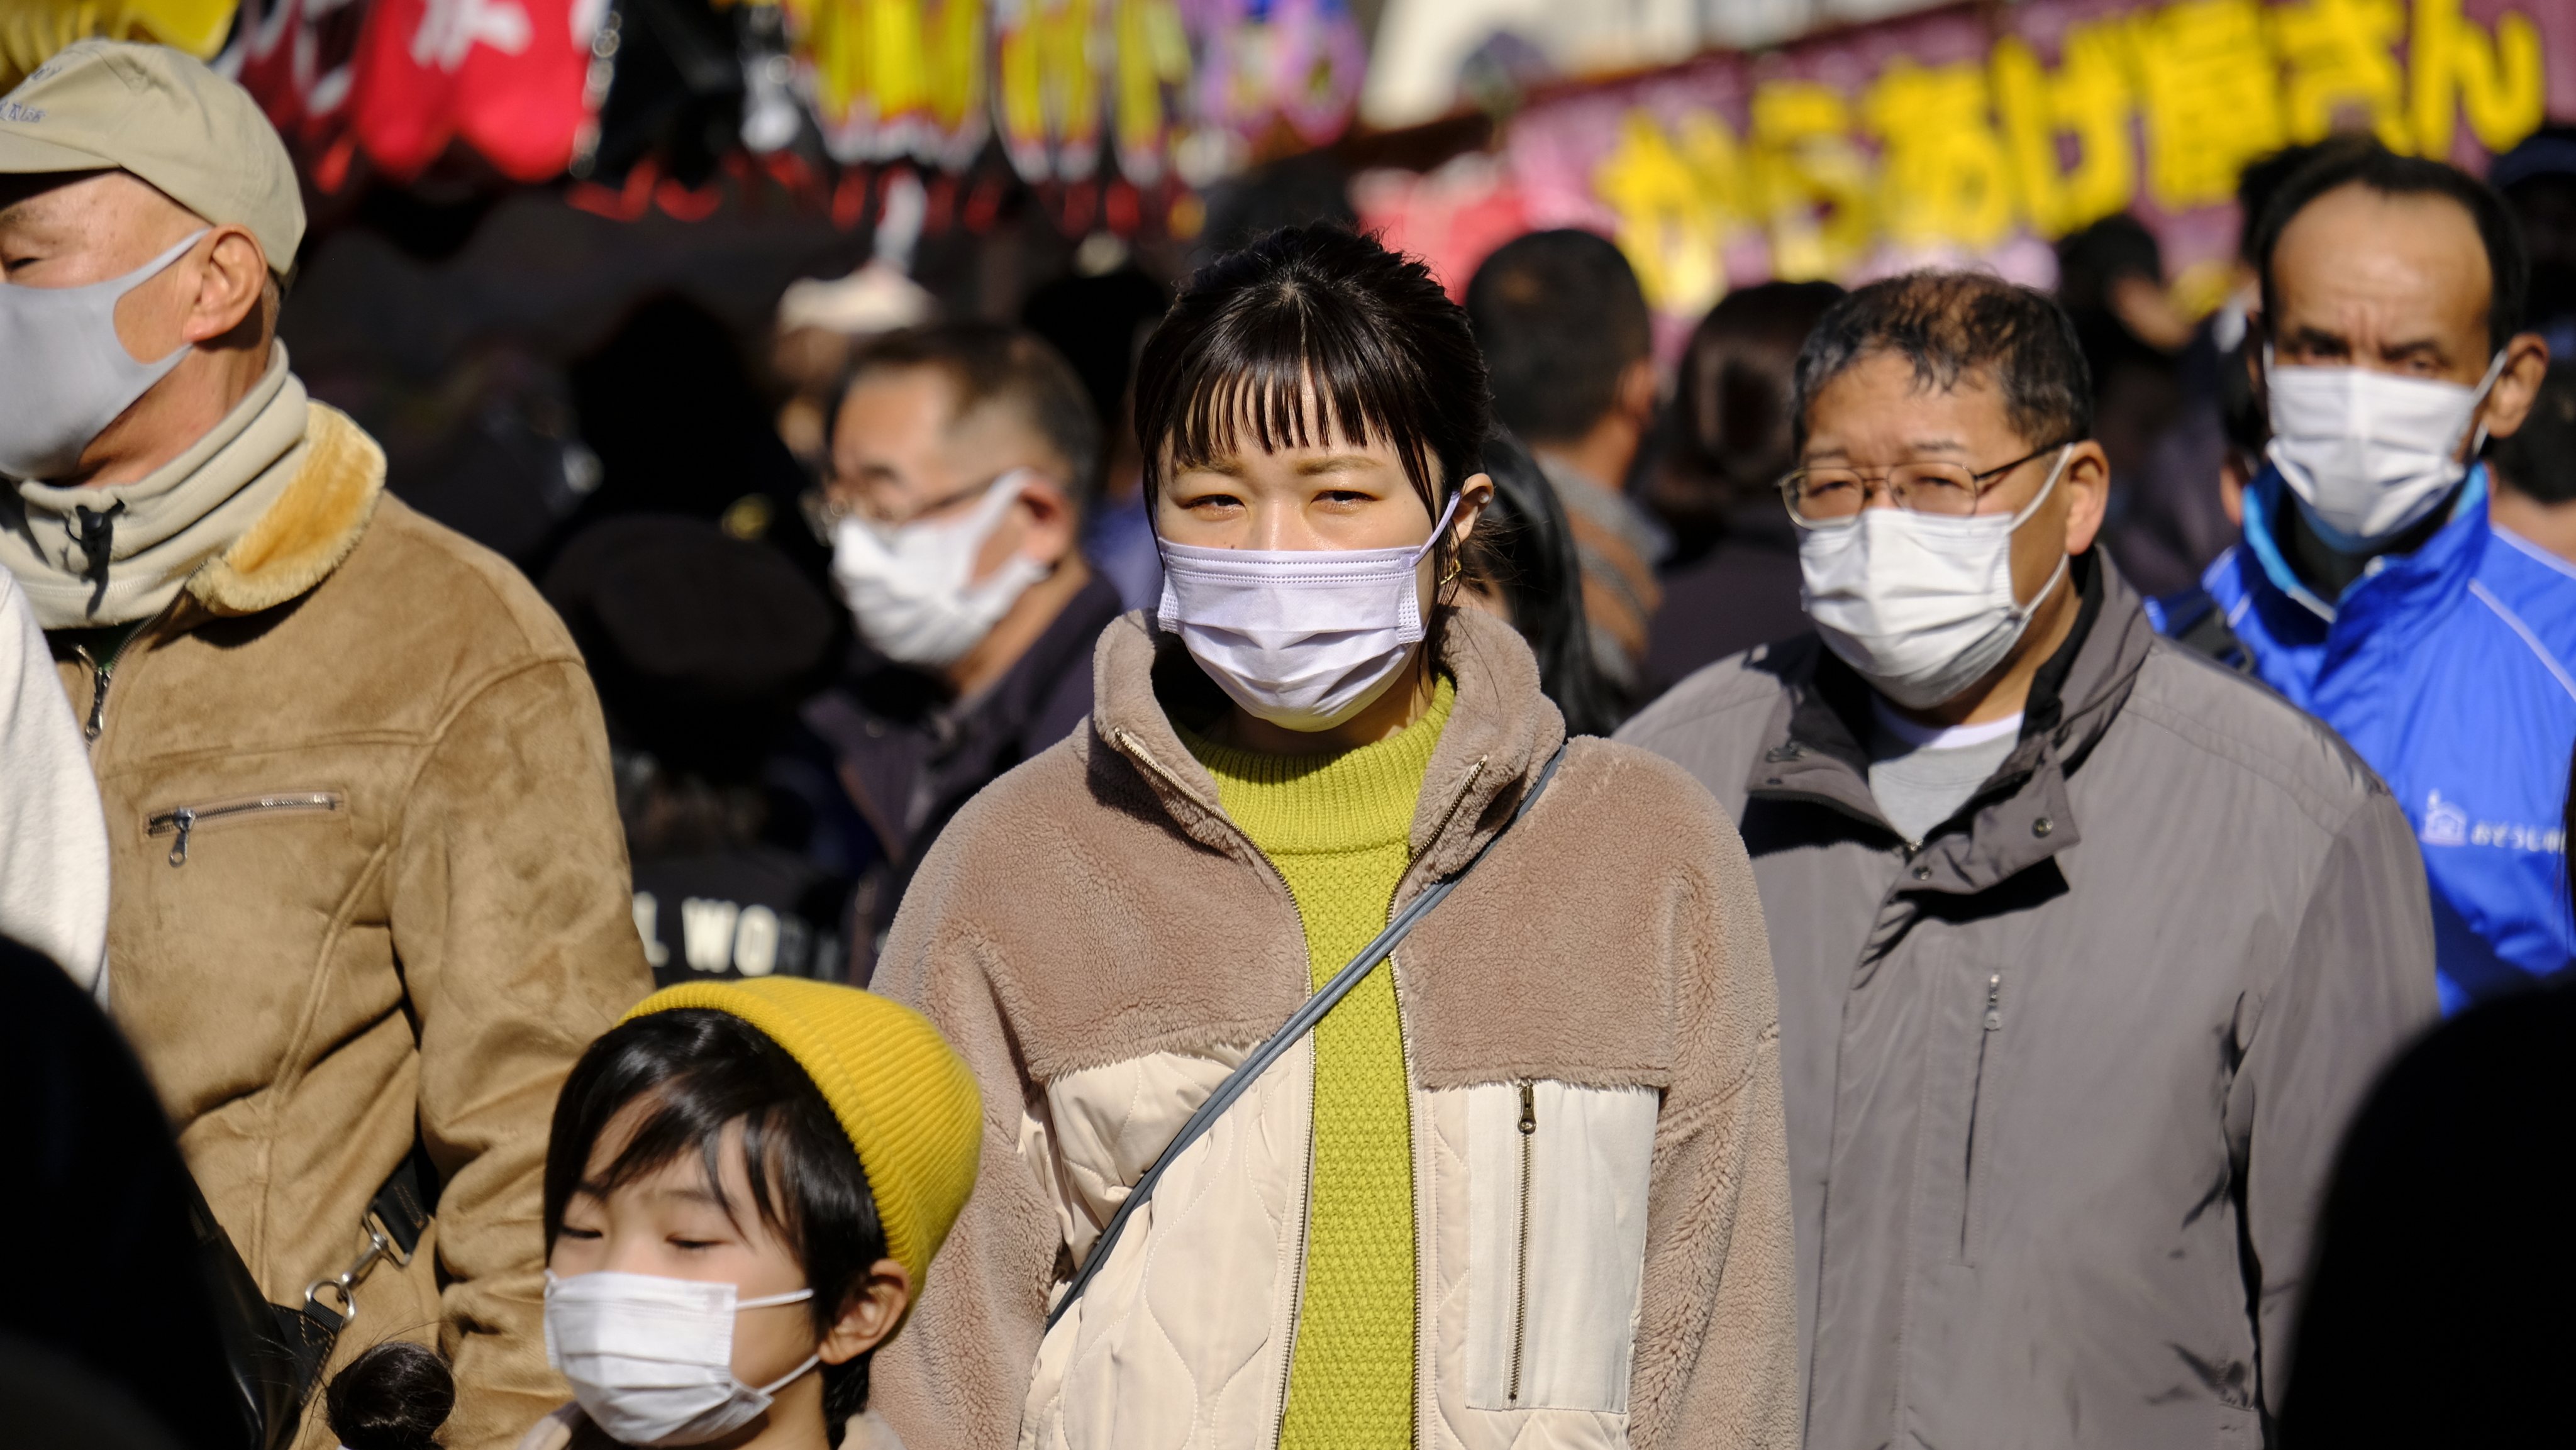 People wearing face masks as a preventive measure against